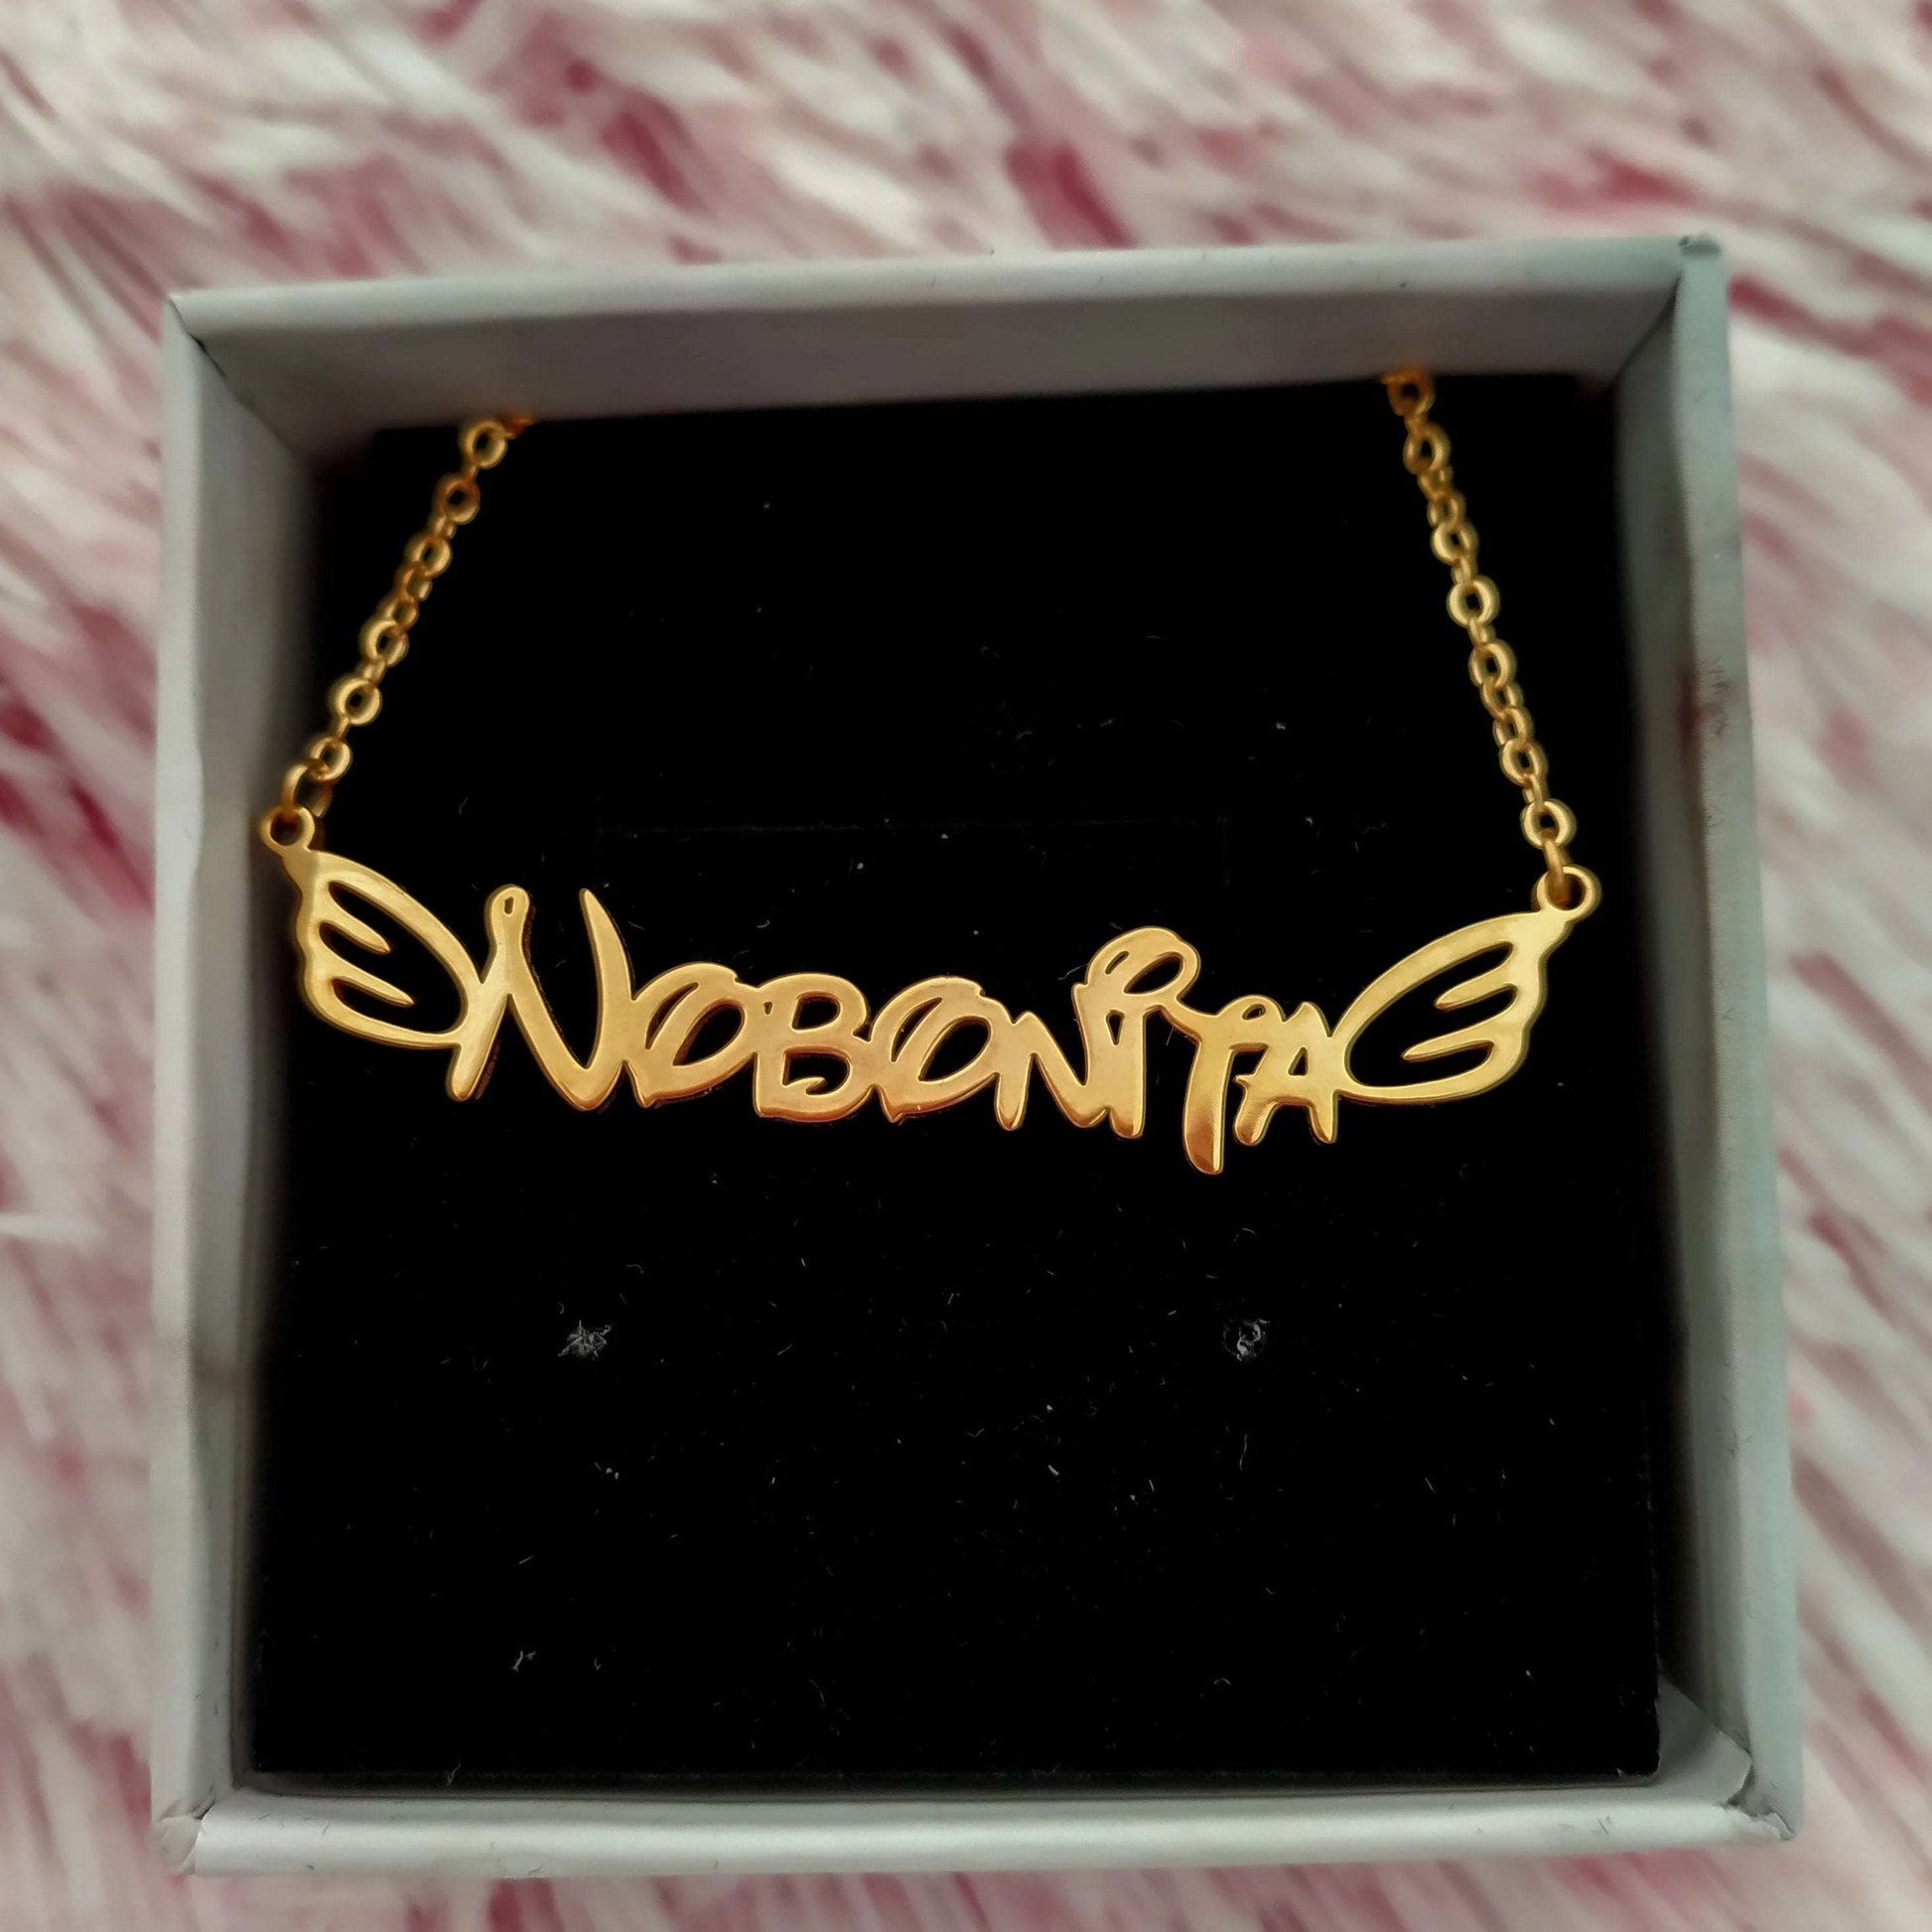 Necklaces Angel Wings Custom Name Necklace KHLOE JEWELS Custom Jewelry